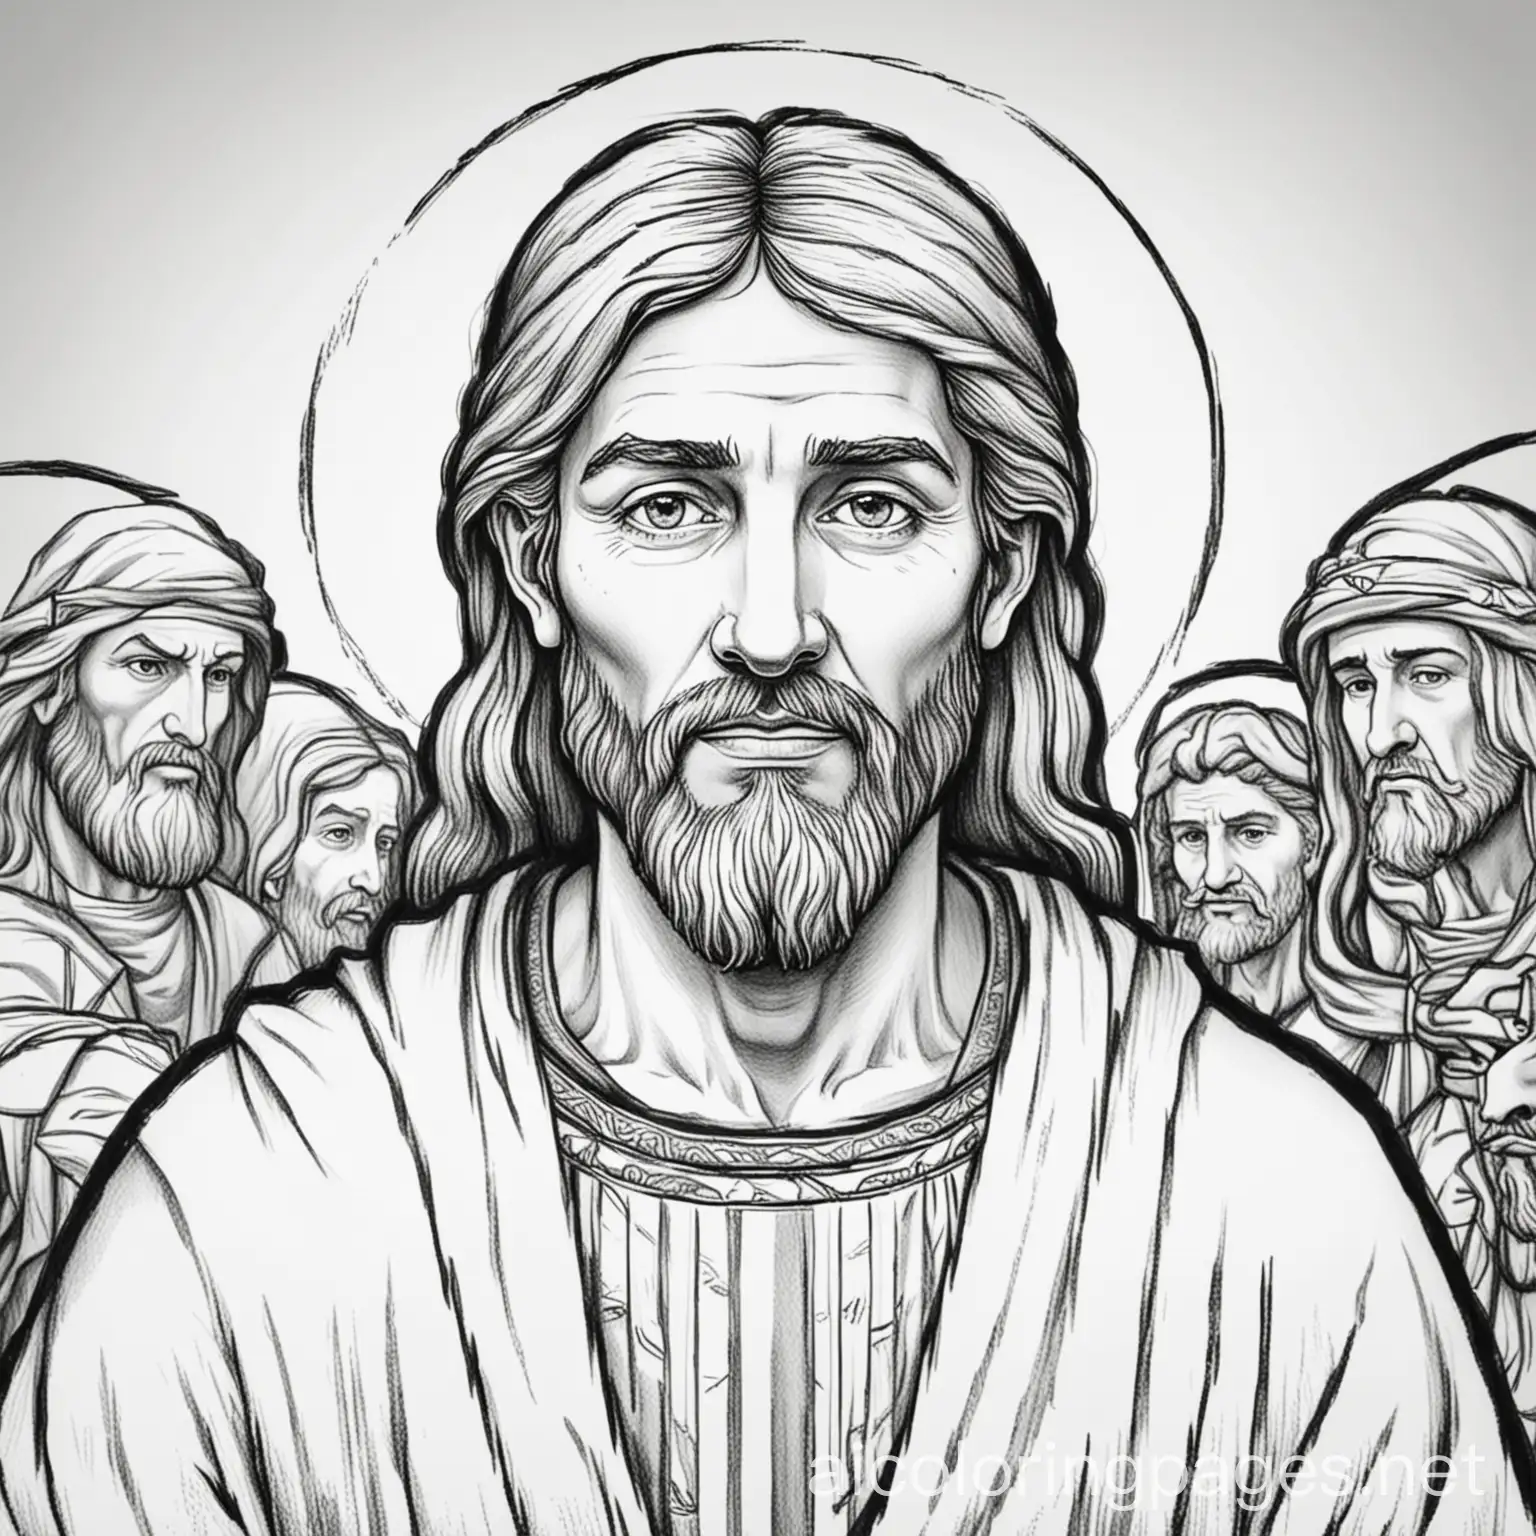 Simon-Disciple-of-Jesus-Coloring-Page-Black-and-White-Line-Art